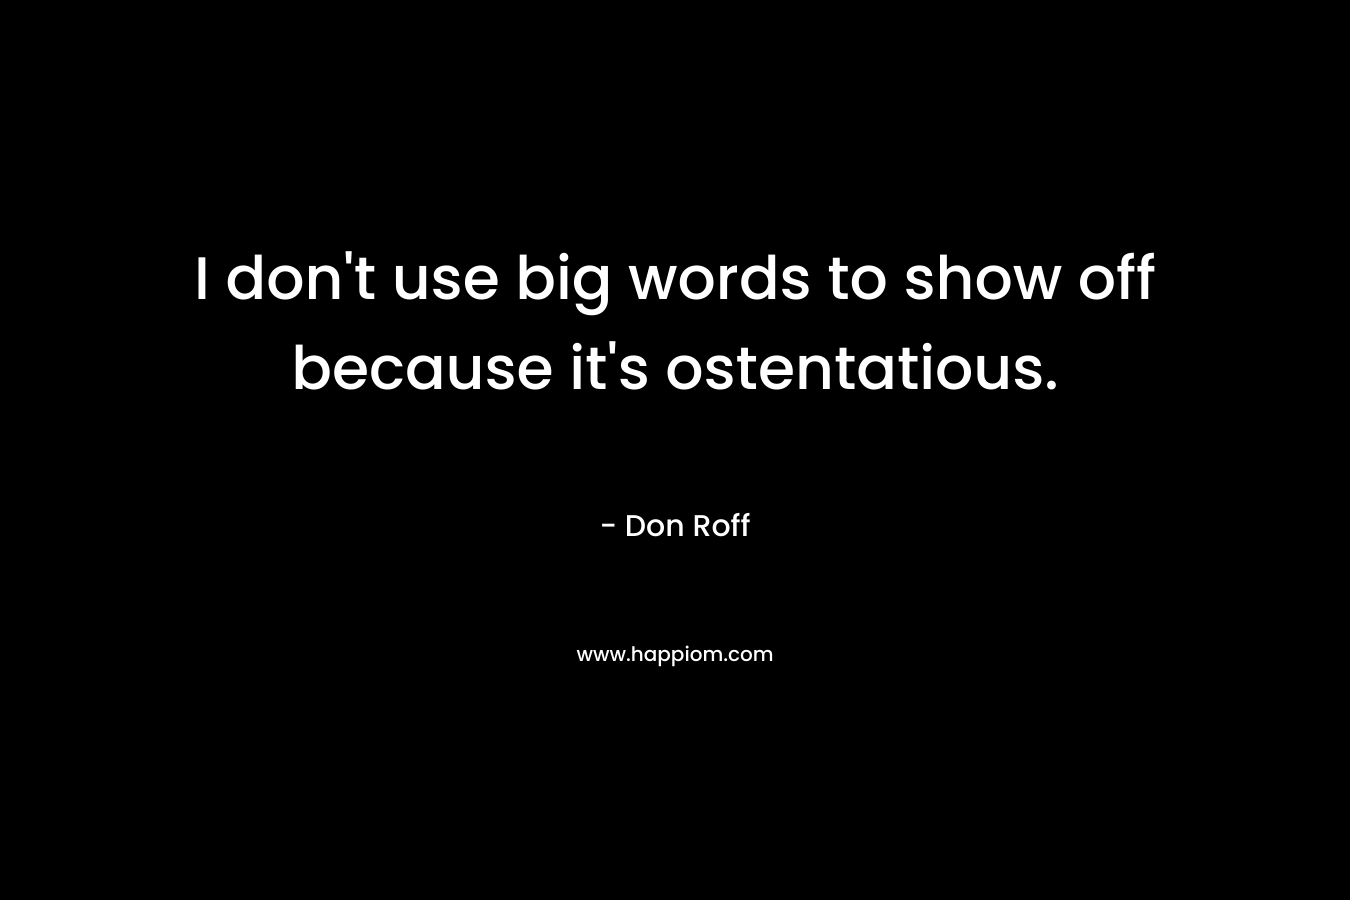 I don't use big words to show off because it's ostentatious.